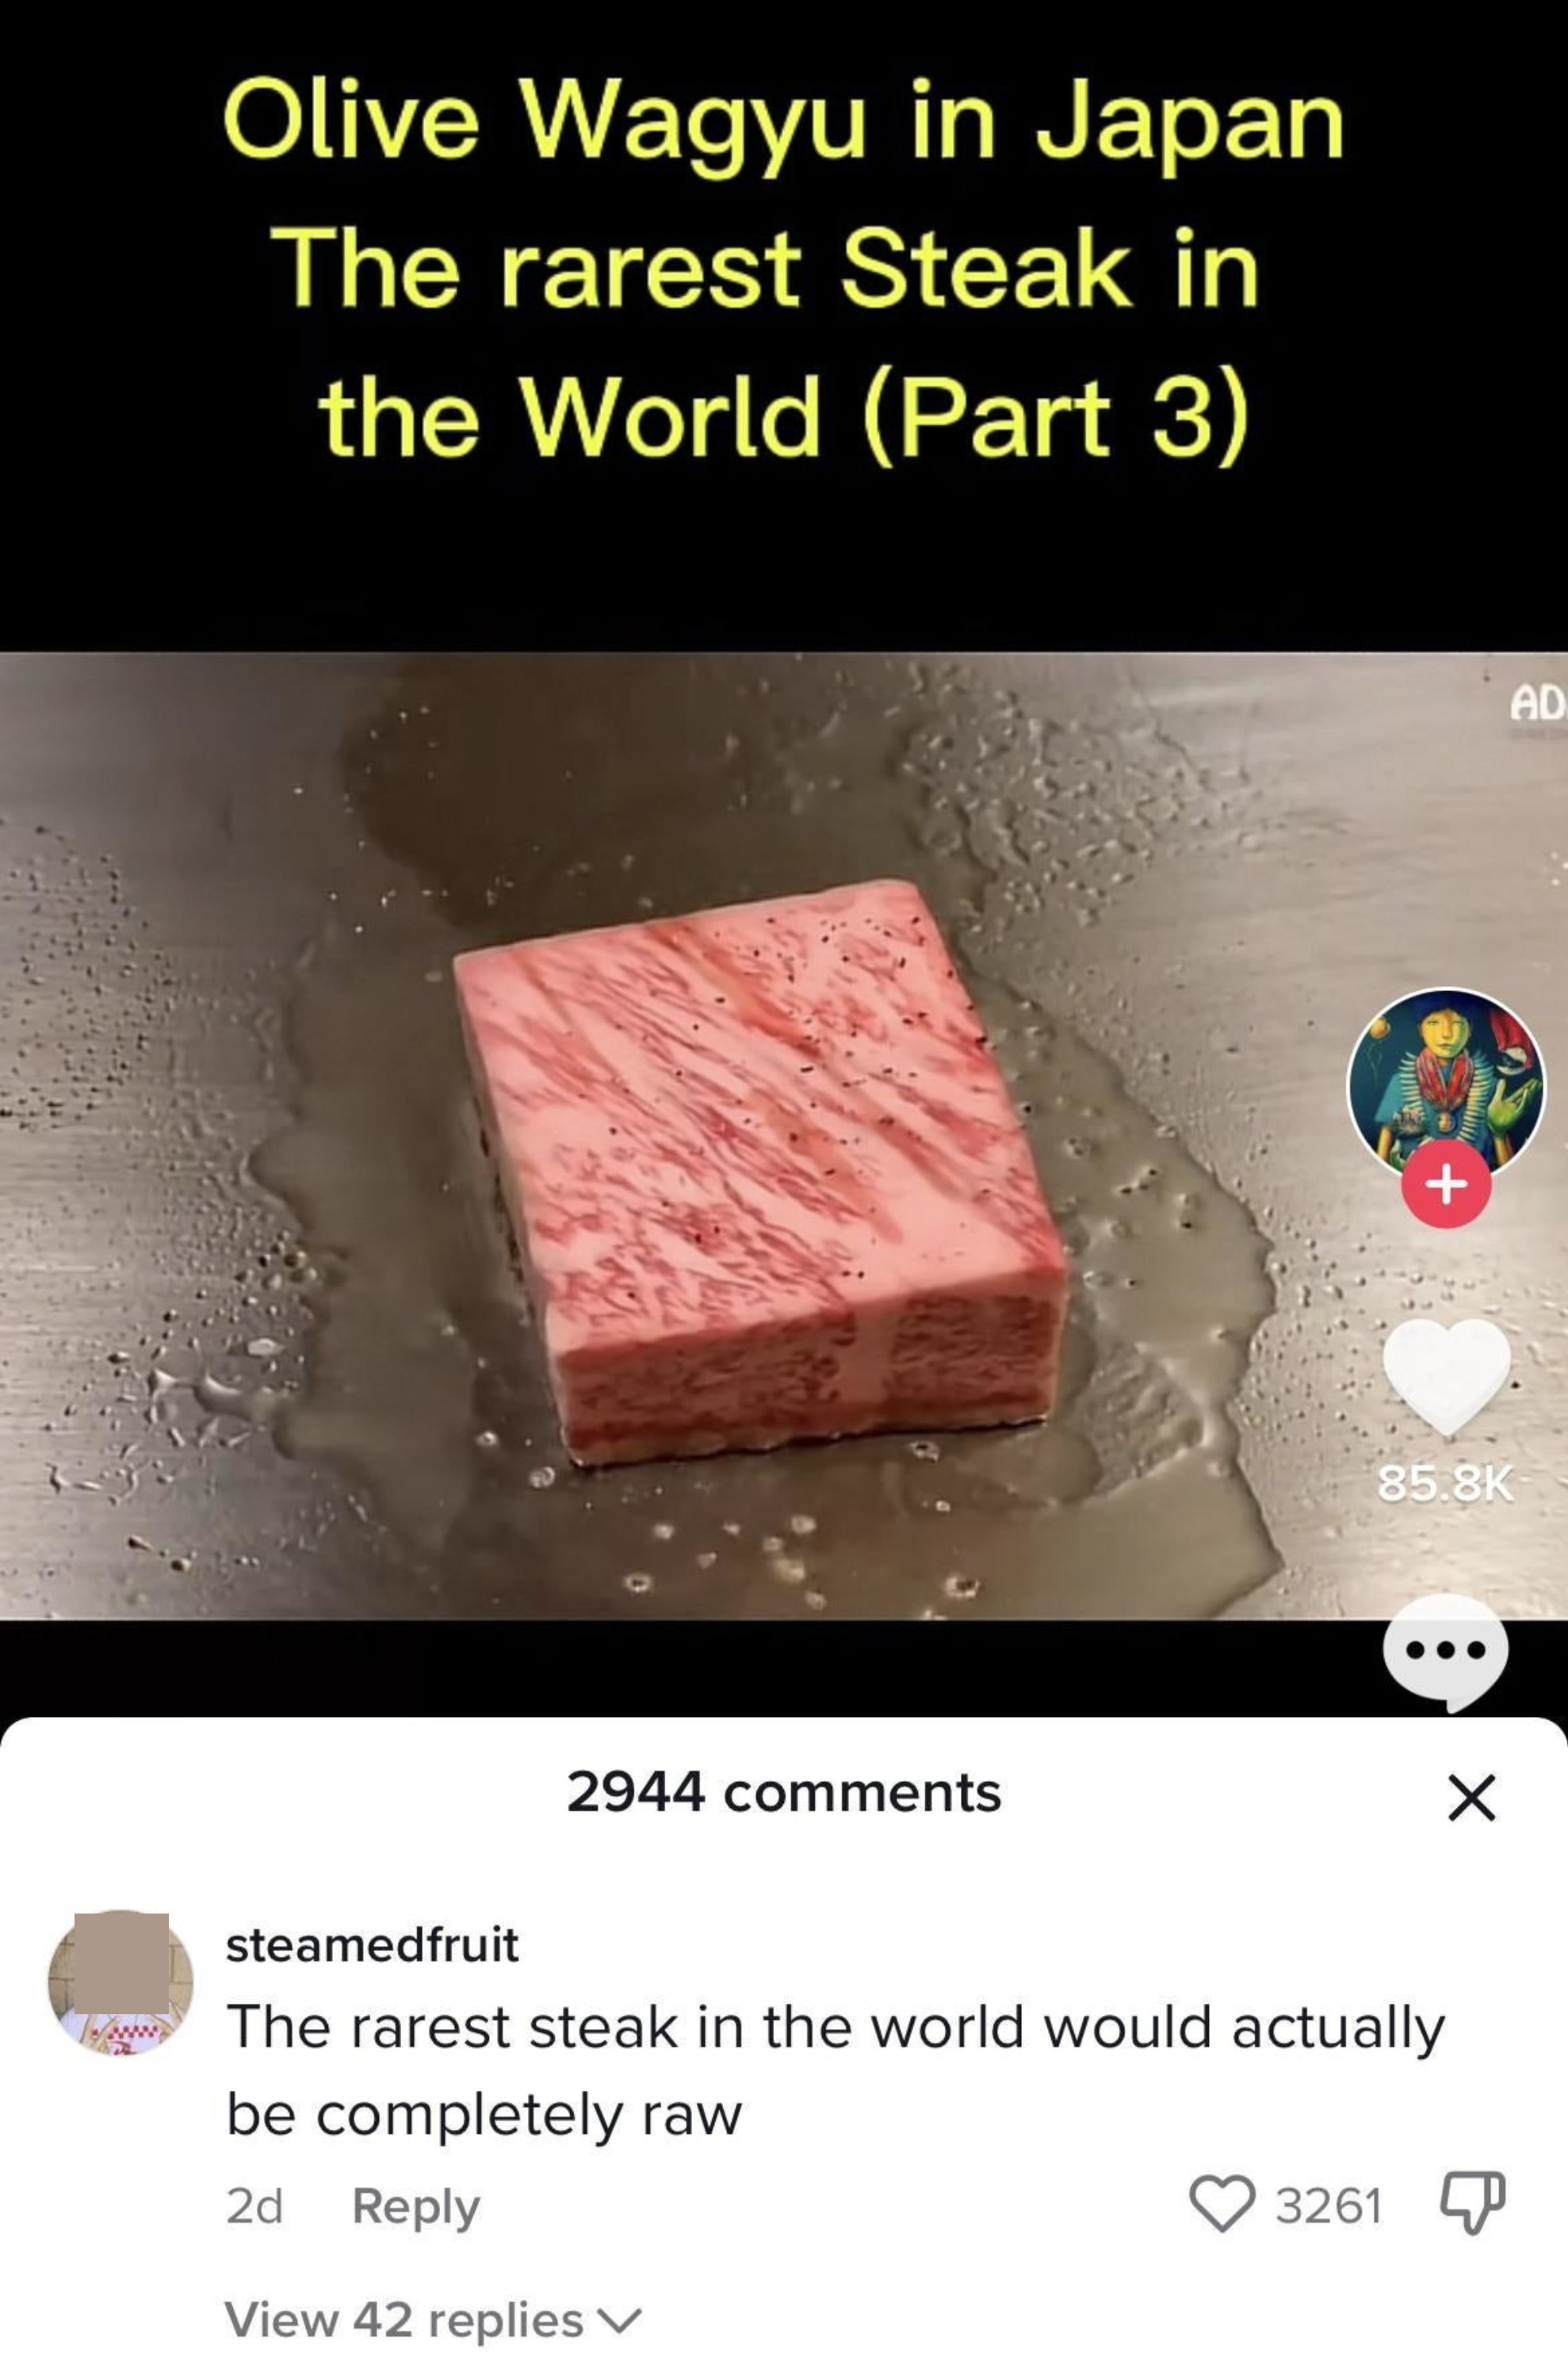 someone shows a picture of the rarest steak in the world and someone replies if it was the rarest steak it would be totally raw